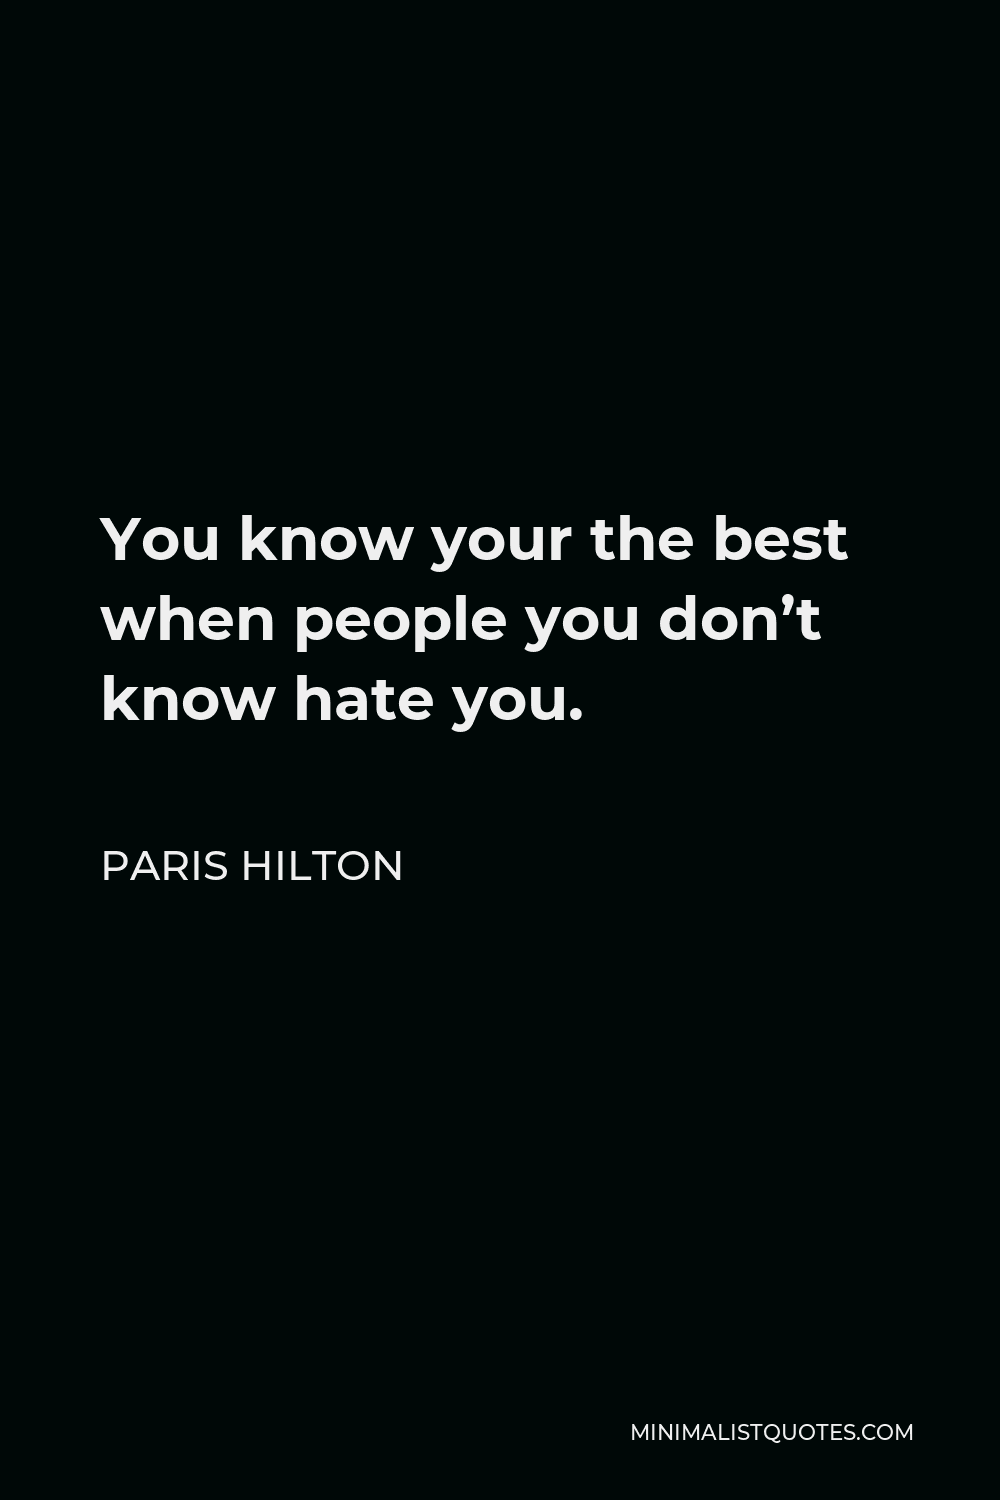 Paris Hilton Quote - You know your the best when people you don’t know hate you.